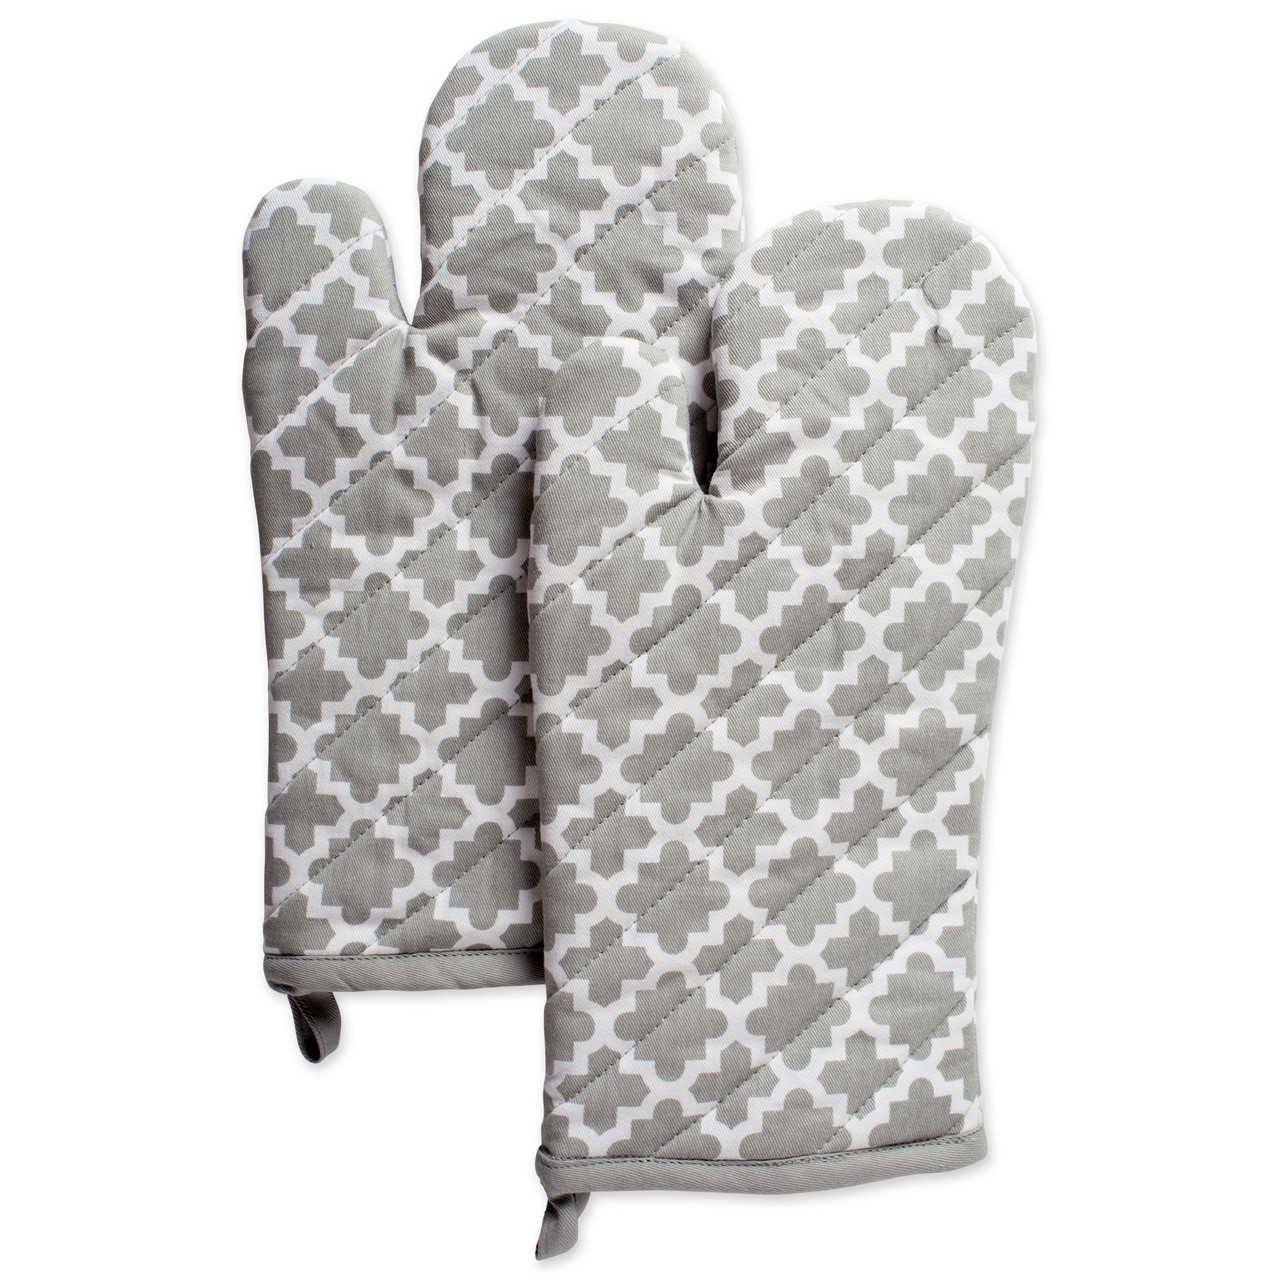 Black and White Oven Mitts Oven Gloves Hot Pad Set Modern Kitchen